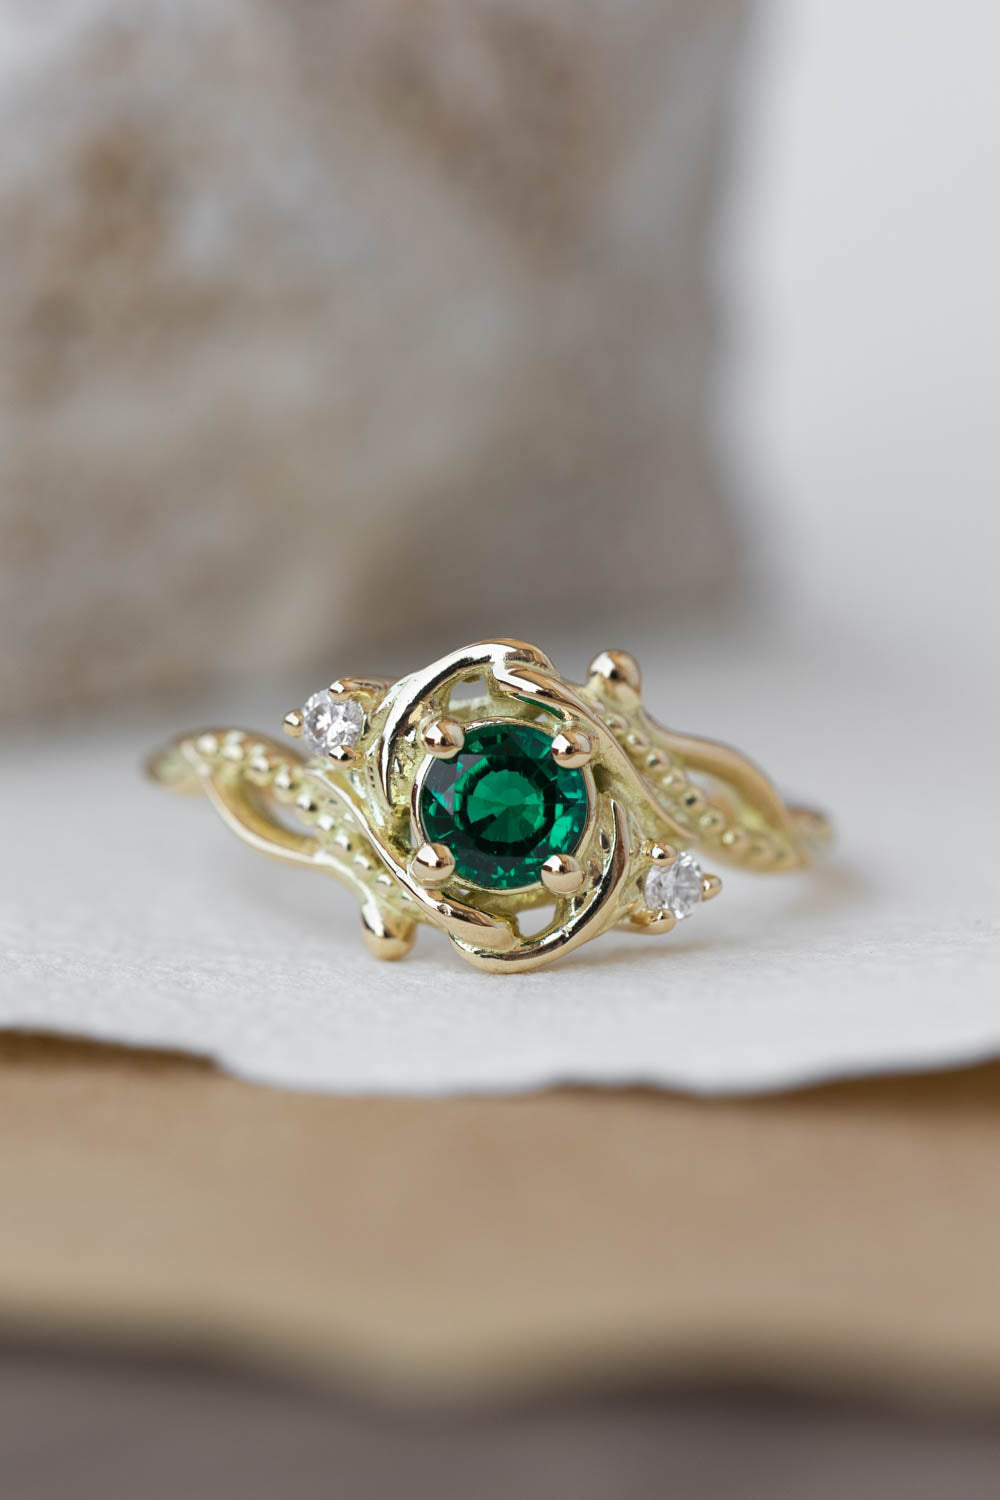 Lab emerald engagement ring, nature themed ring with accent diamonds  / Undina - Eden Garden Jewelry™